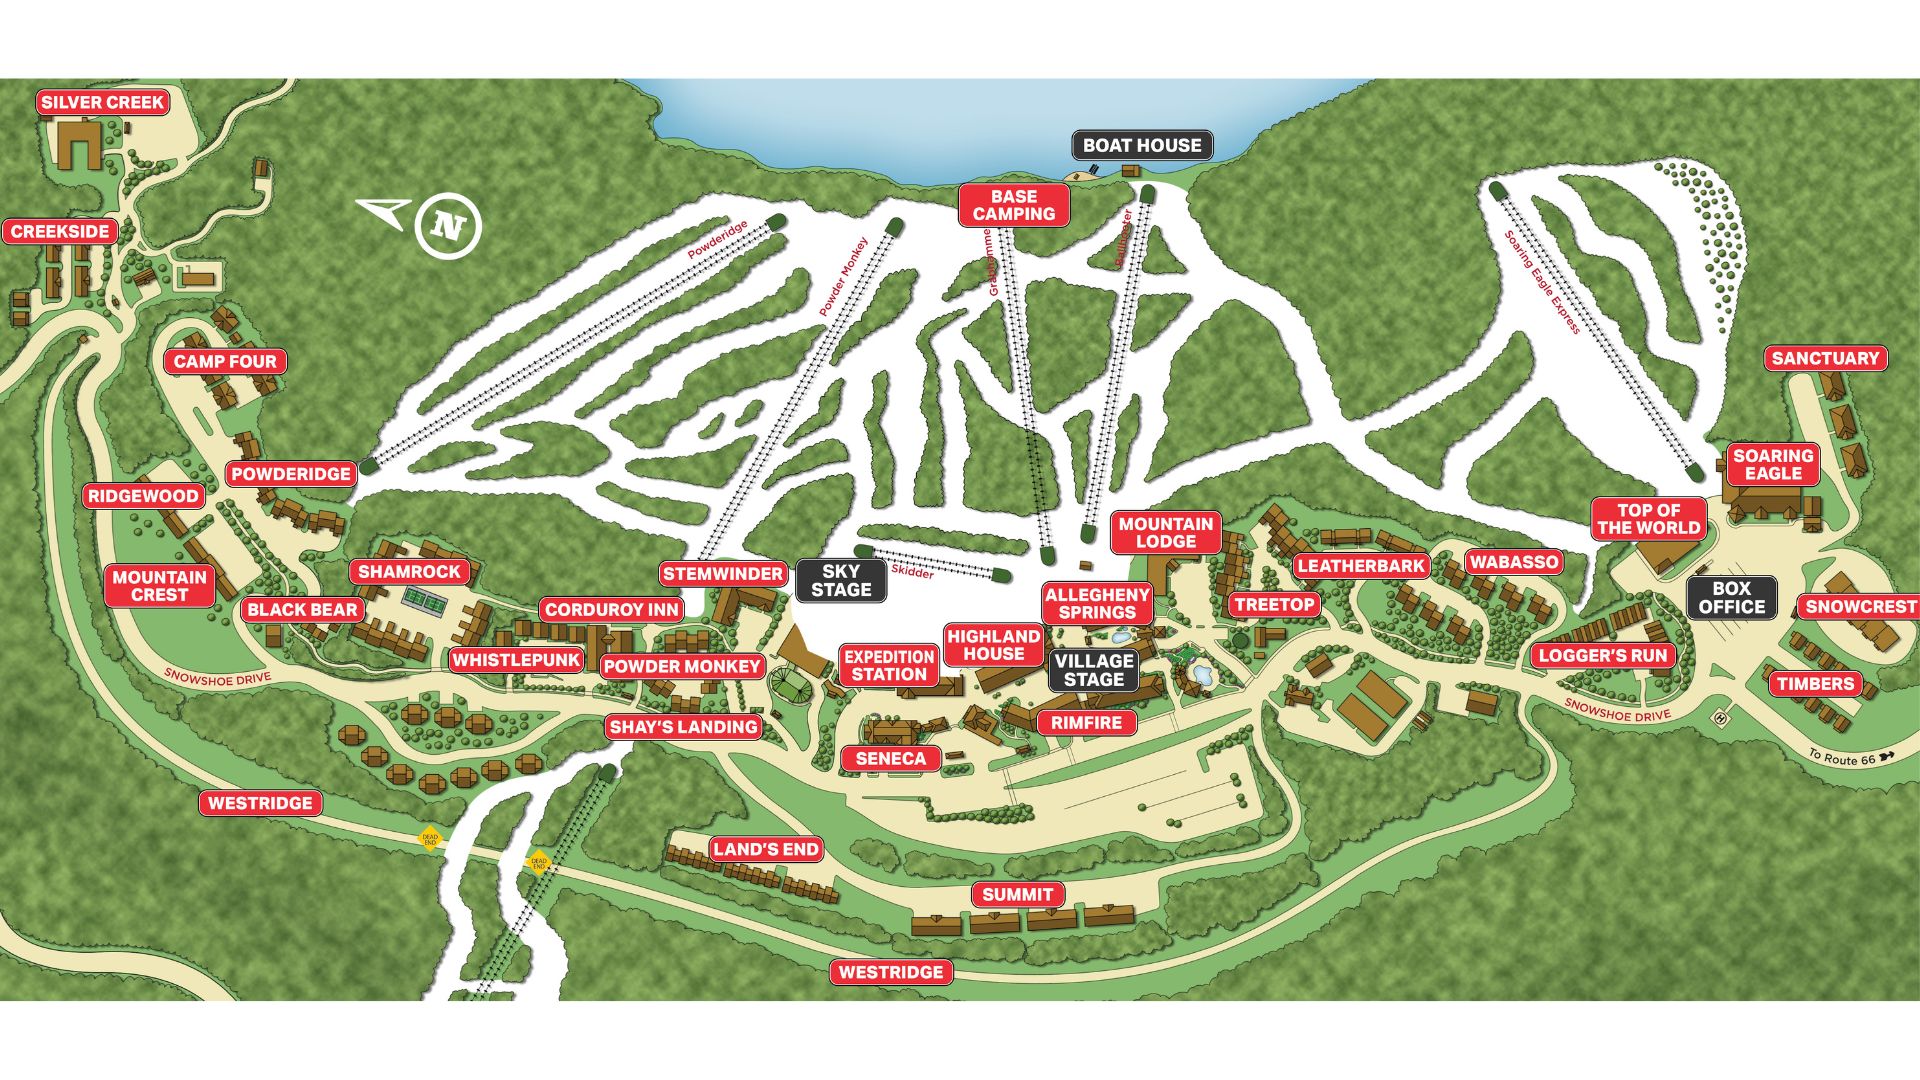 Snowshoe WV Resort 4848 Music Festival Lodging and Camping Map